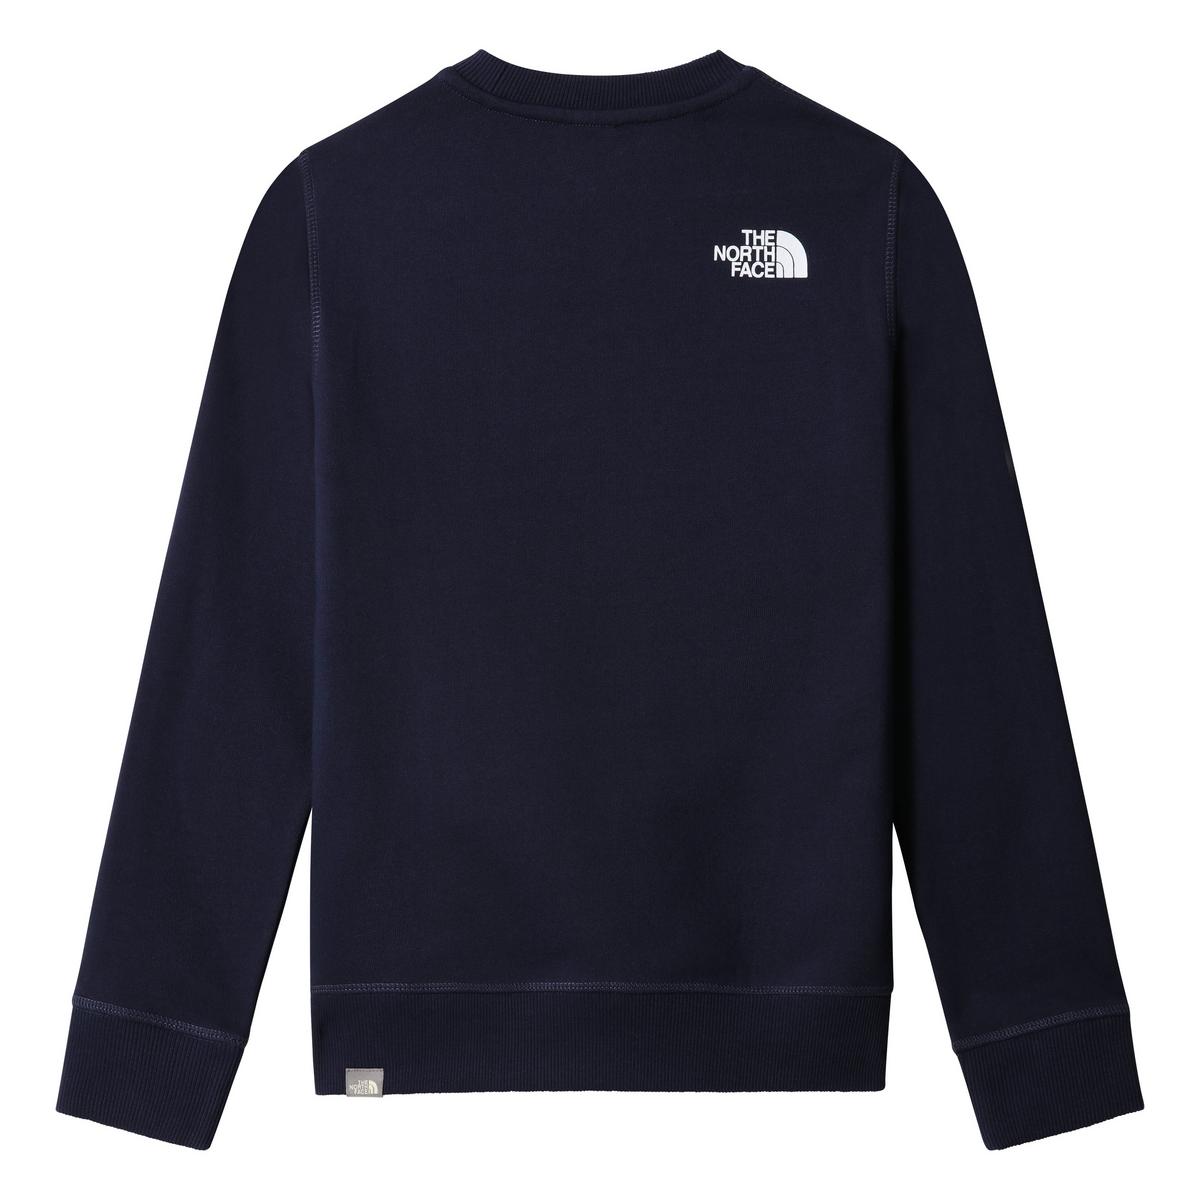 The North Face Kids Youth Box Pullover - Navy Blue